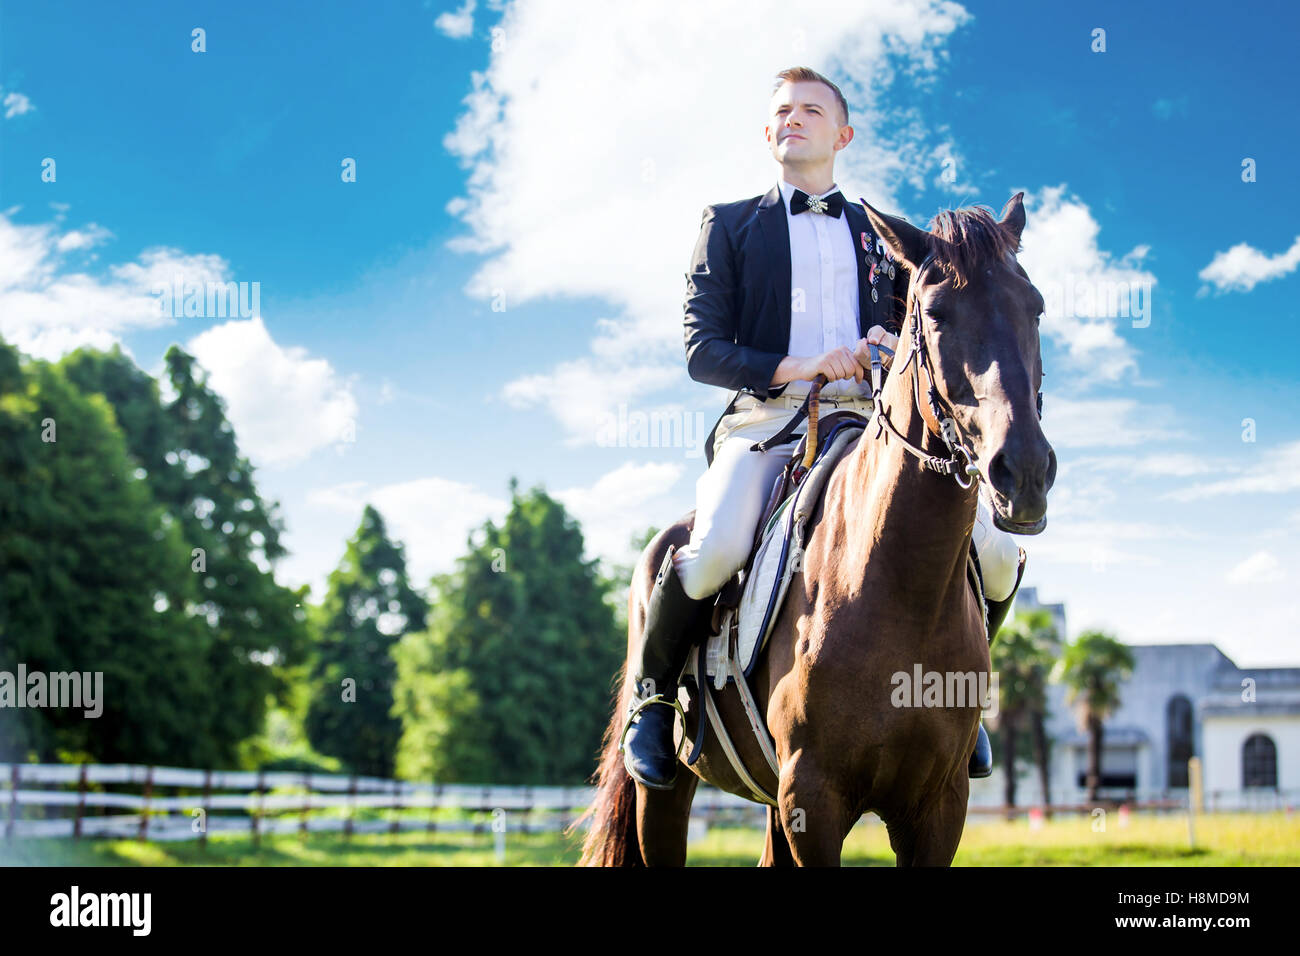 Thoughtful well-dressed man sitting on horse against cloudy sky Stock Photo